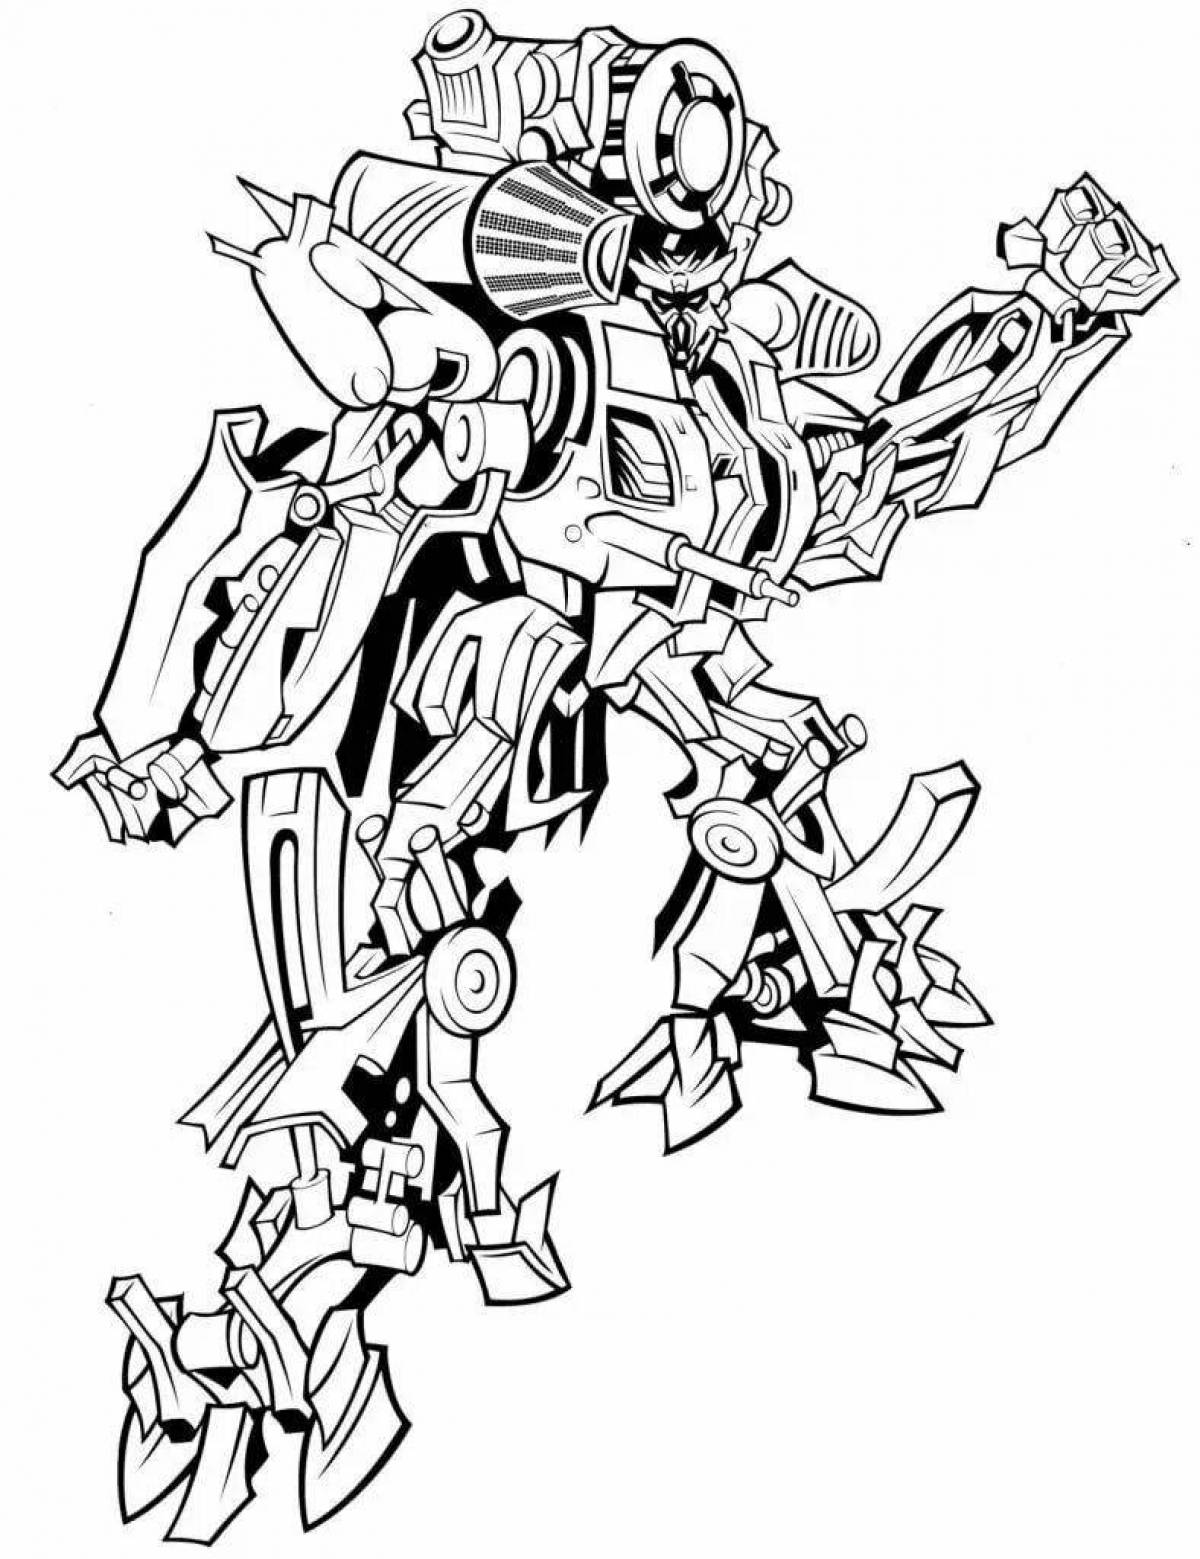 Bright barricade coloring page